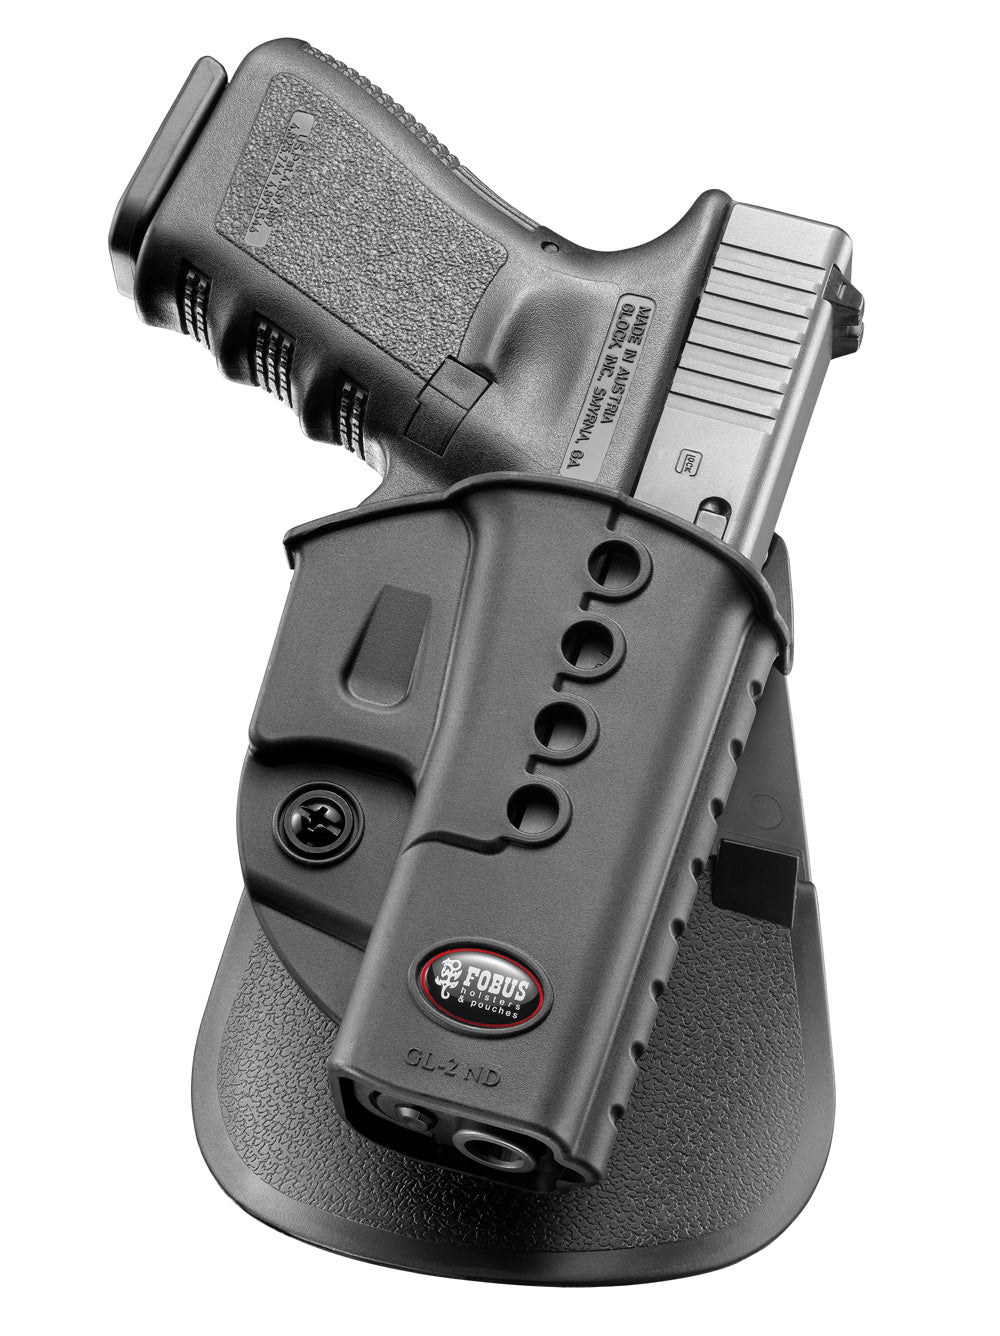 Fobus gl-2 nd paddle holster